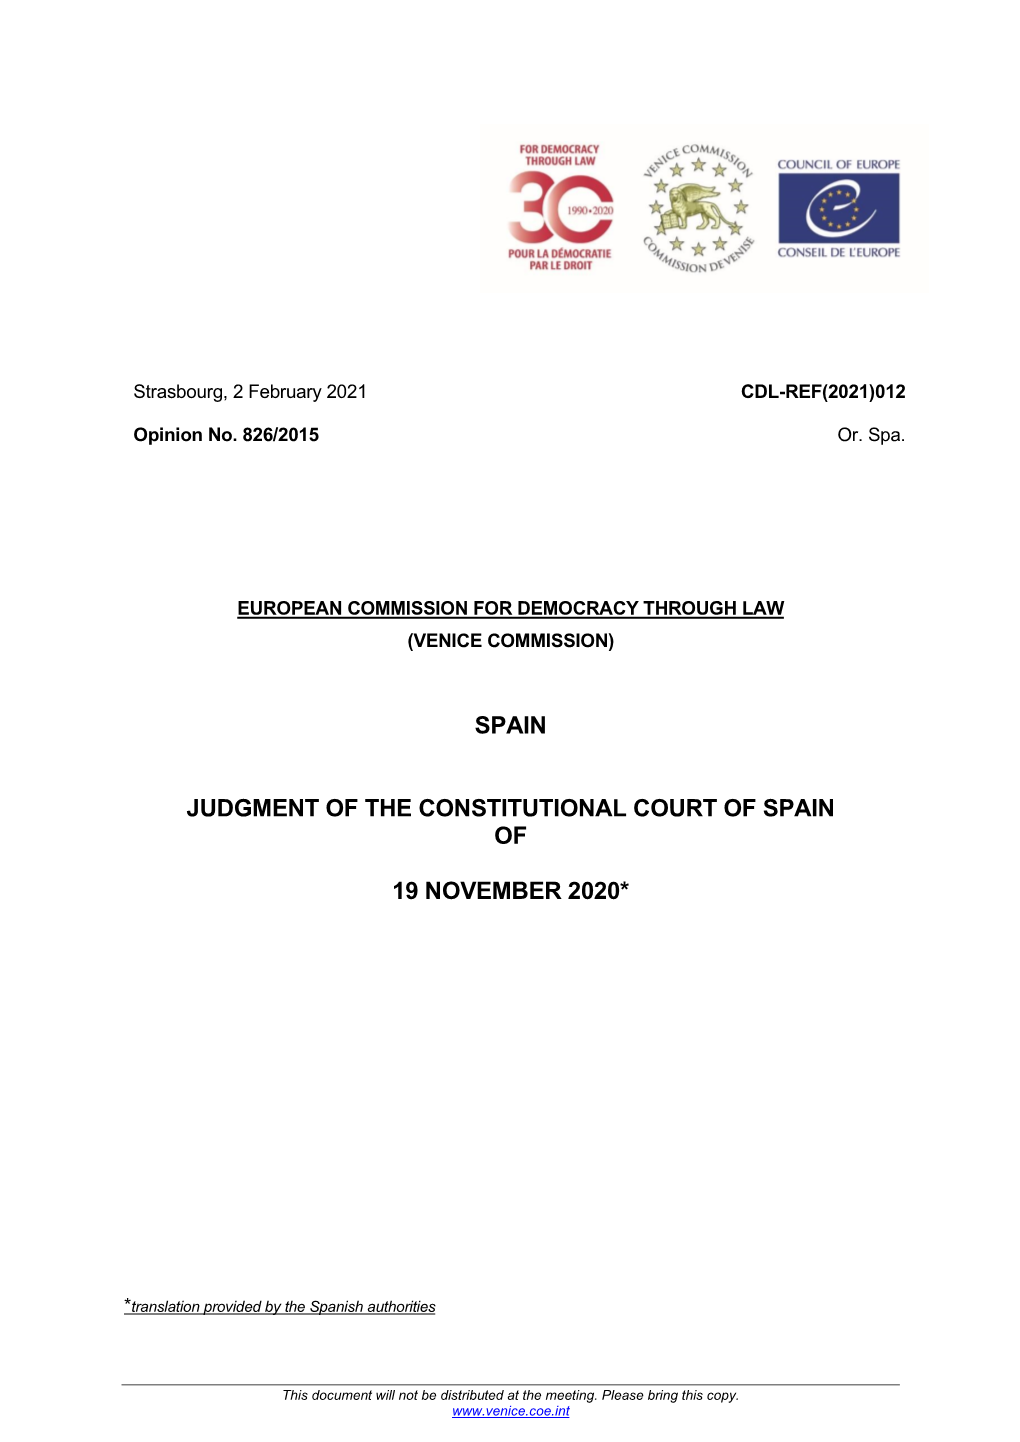 Spain Judgment of the Constitutional Court Of